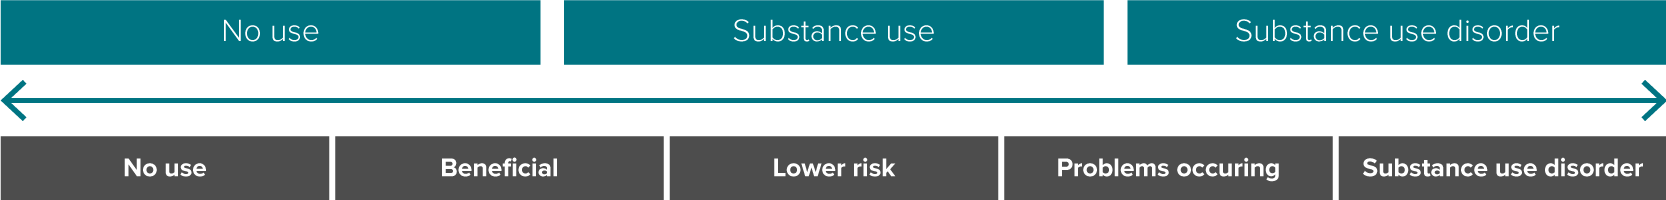 No use, substance use, substance use disorder spectrum